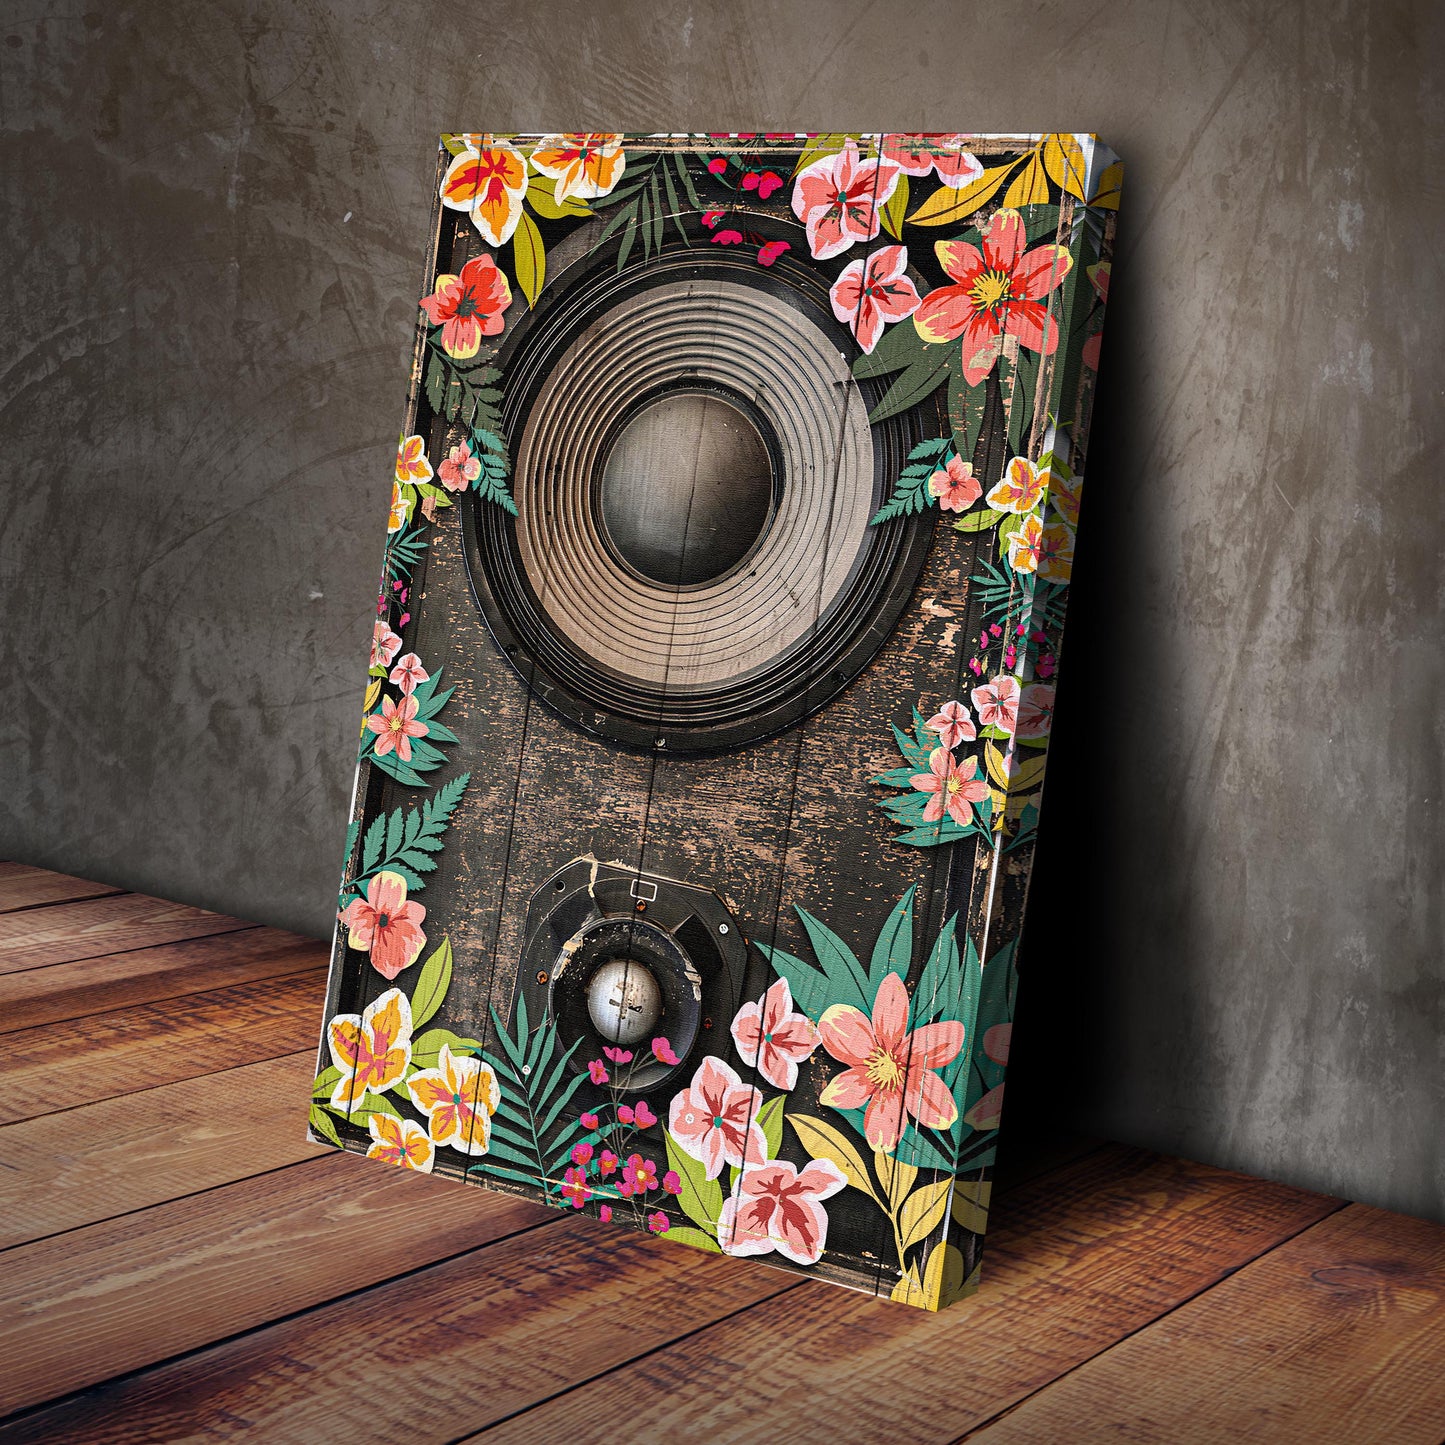 Music Equipment Speakers Rustic Canvas Wall Art Style 2 - Image by Tailored Canvases